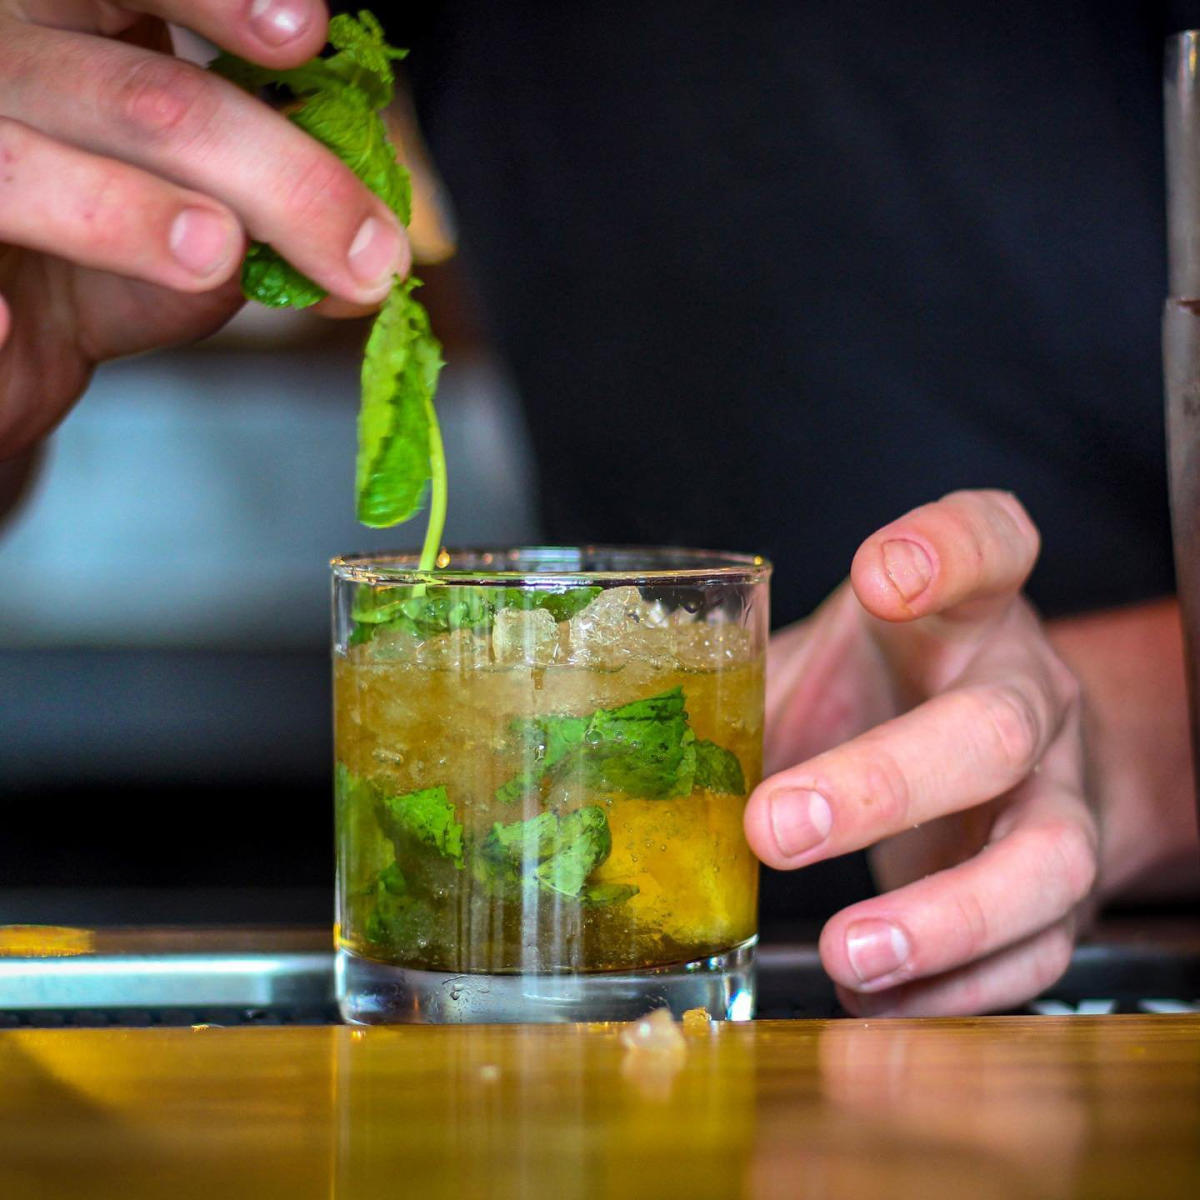 A man's hand places a sprig of mint into a mint julep cocktail on ice